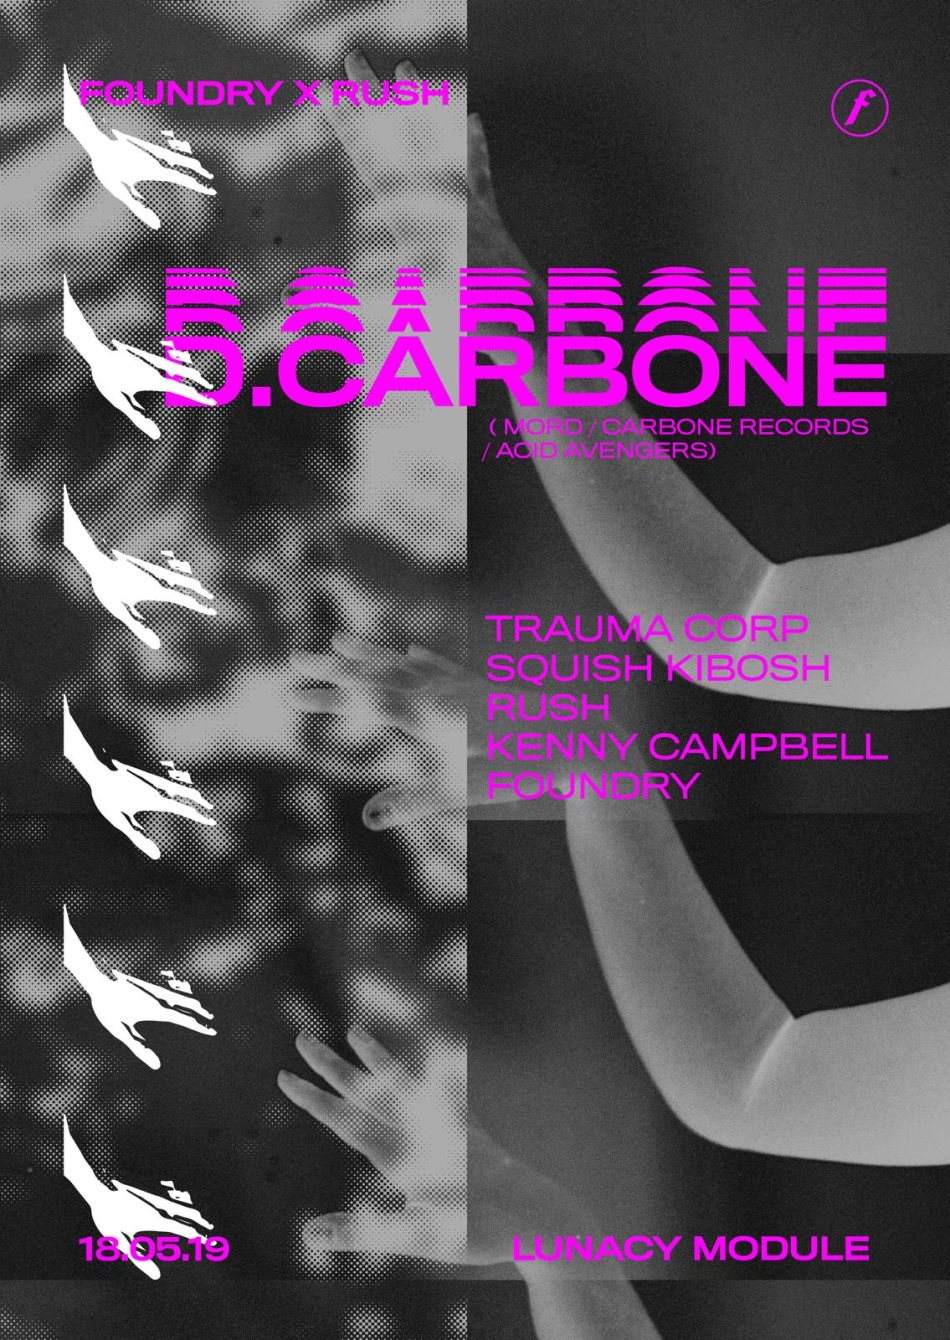 Foundry x Rush - D.Carbone (Mord,Carbone Records) - フライヤー裏